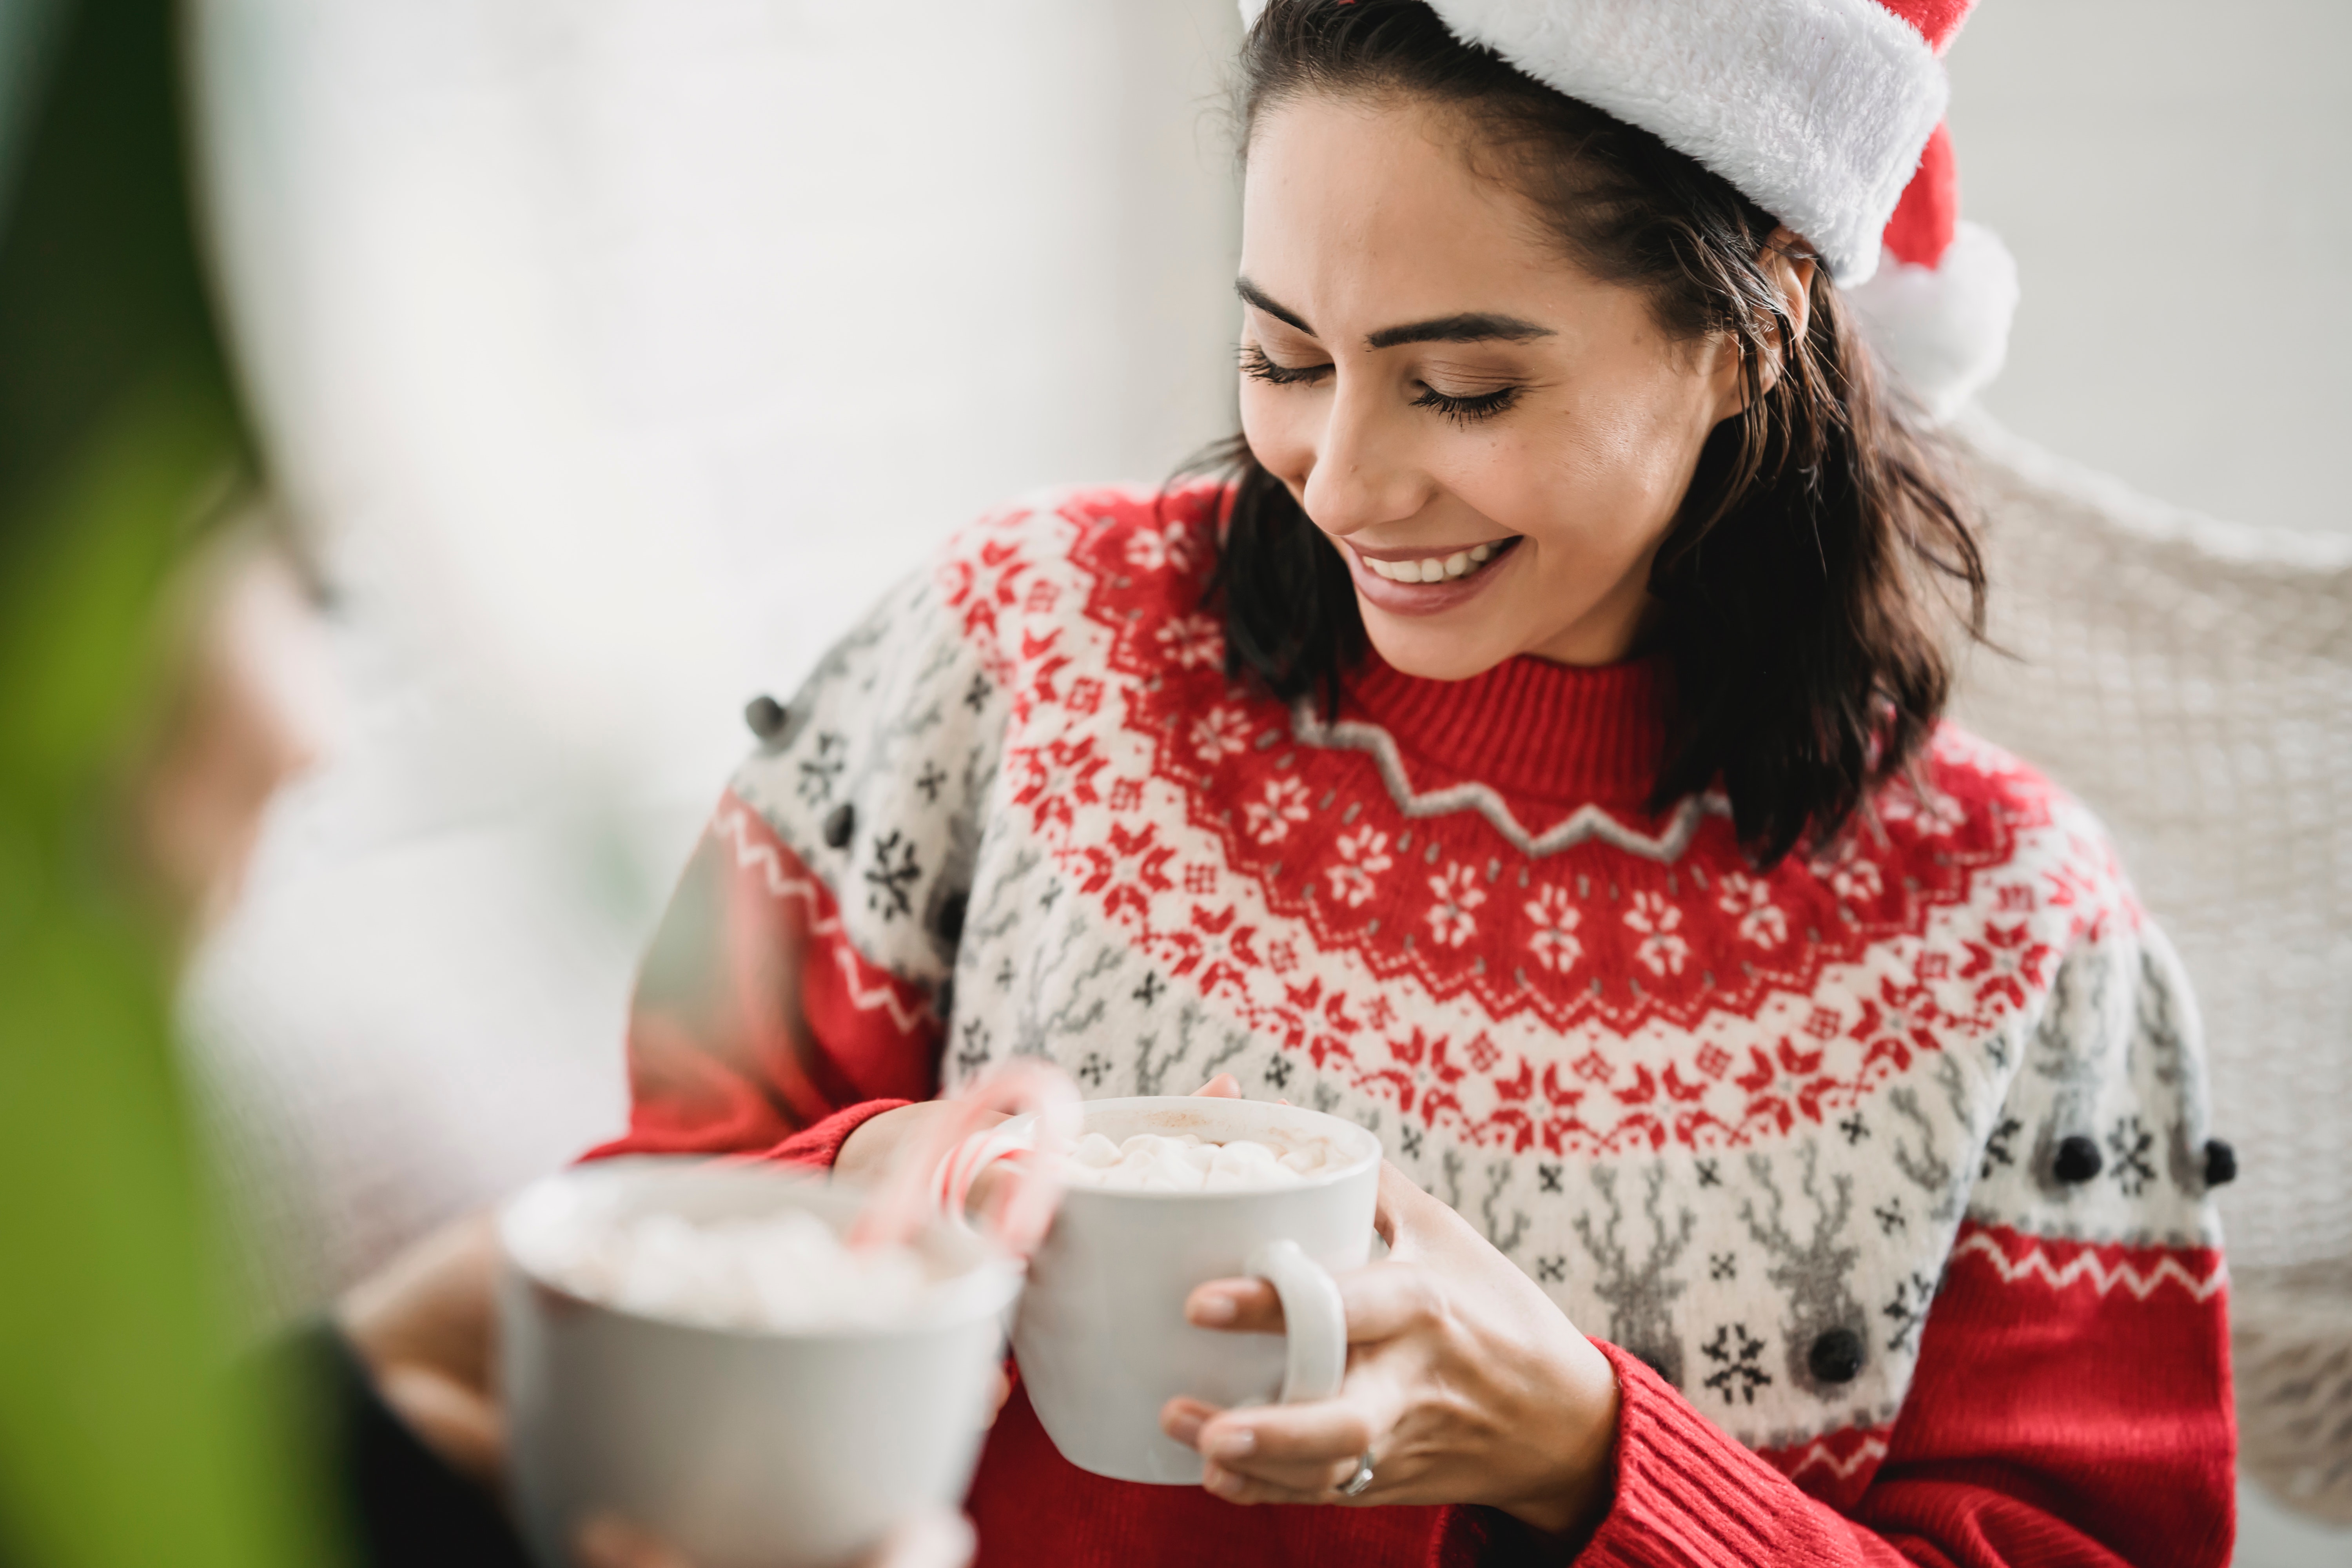 A woman in a red holiday sweater and a Santa hat drinking hot chocolate with a candy cane in it.